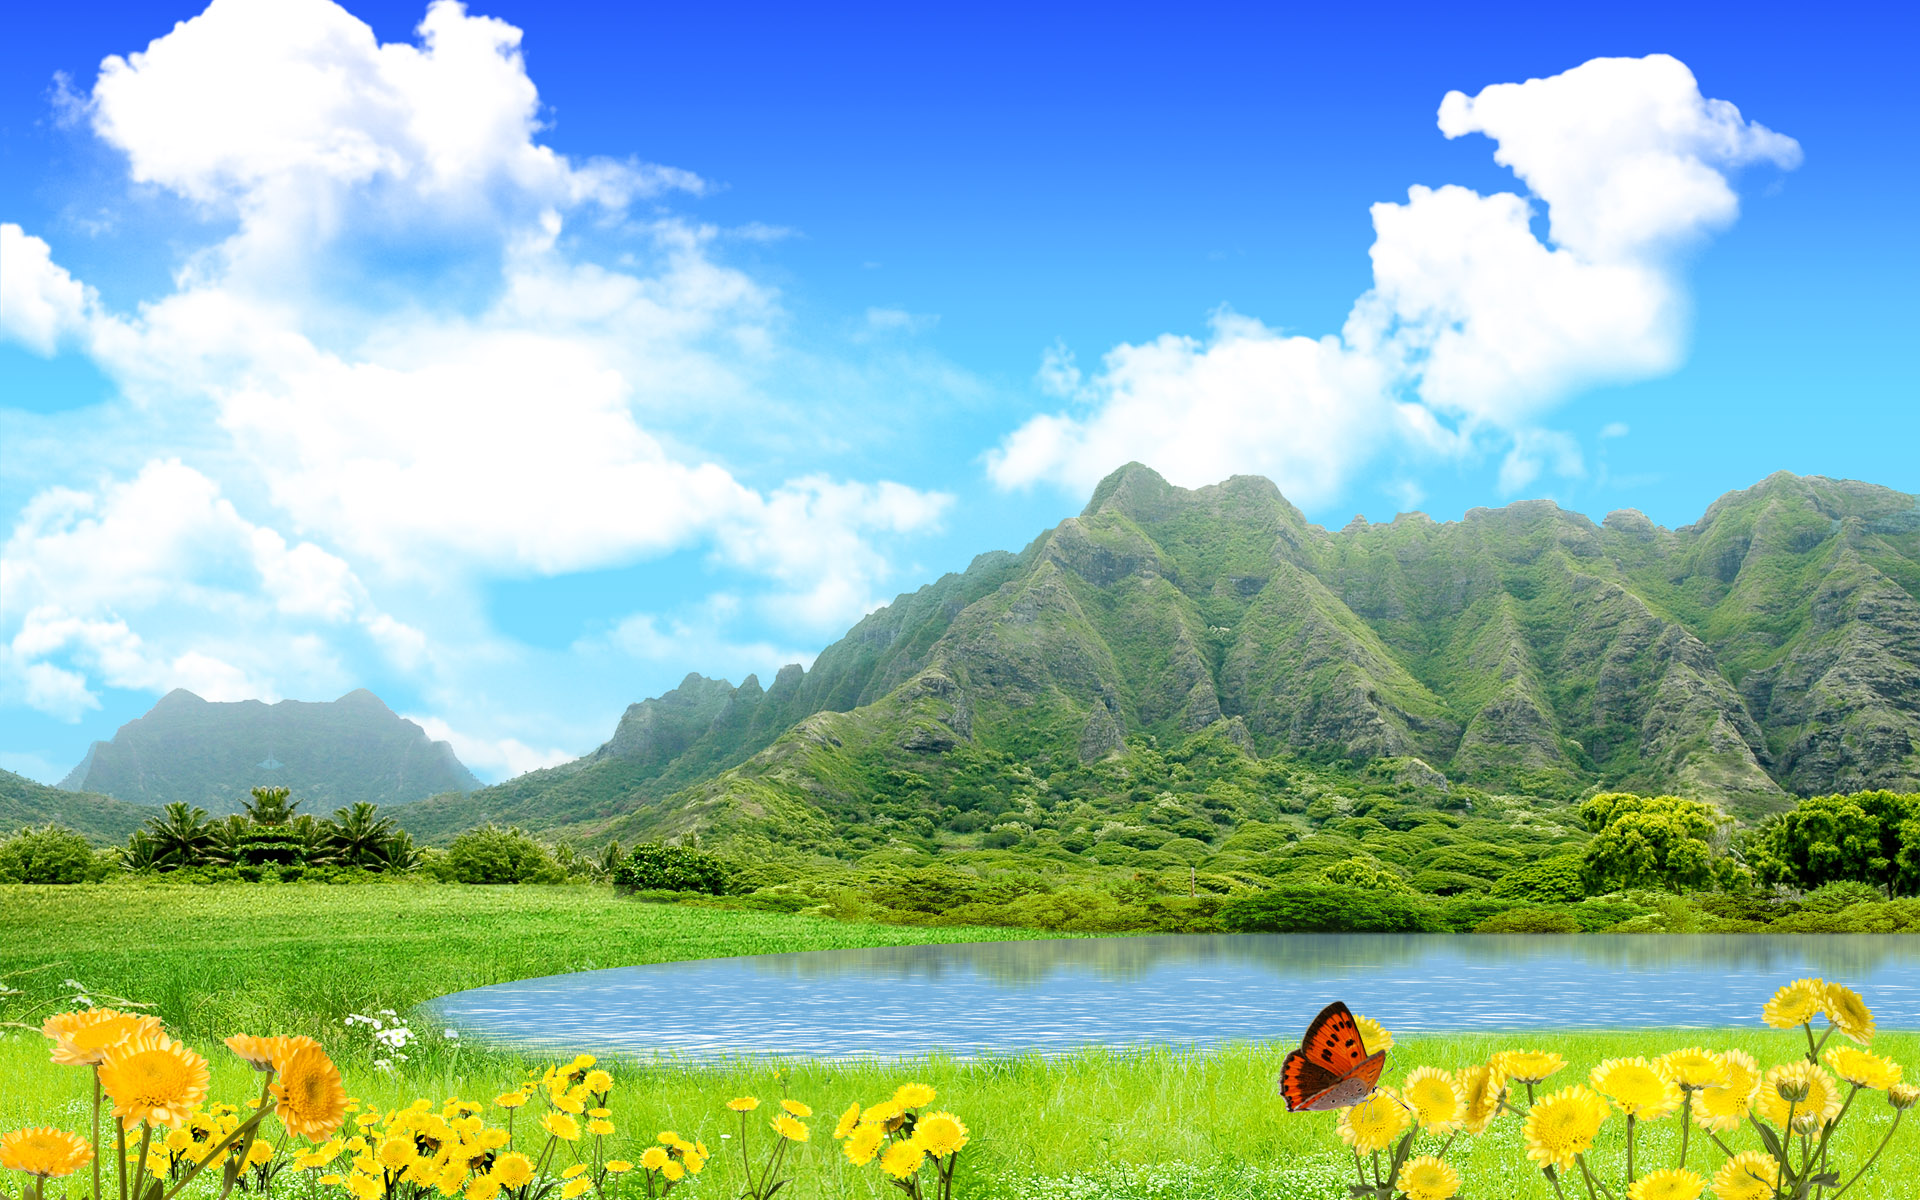 Scenery Wallpaper Includes Green Mountains Blue Sea And Yellow